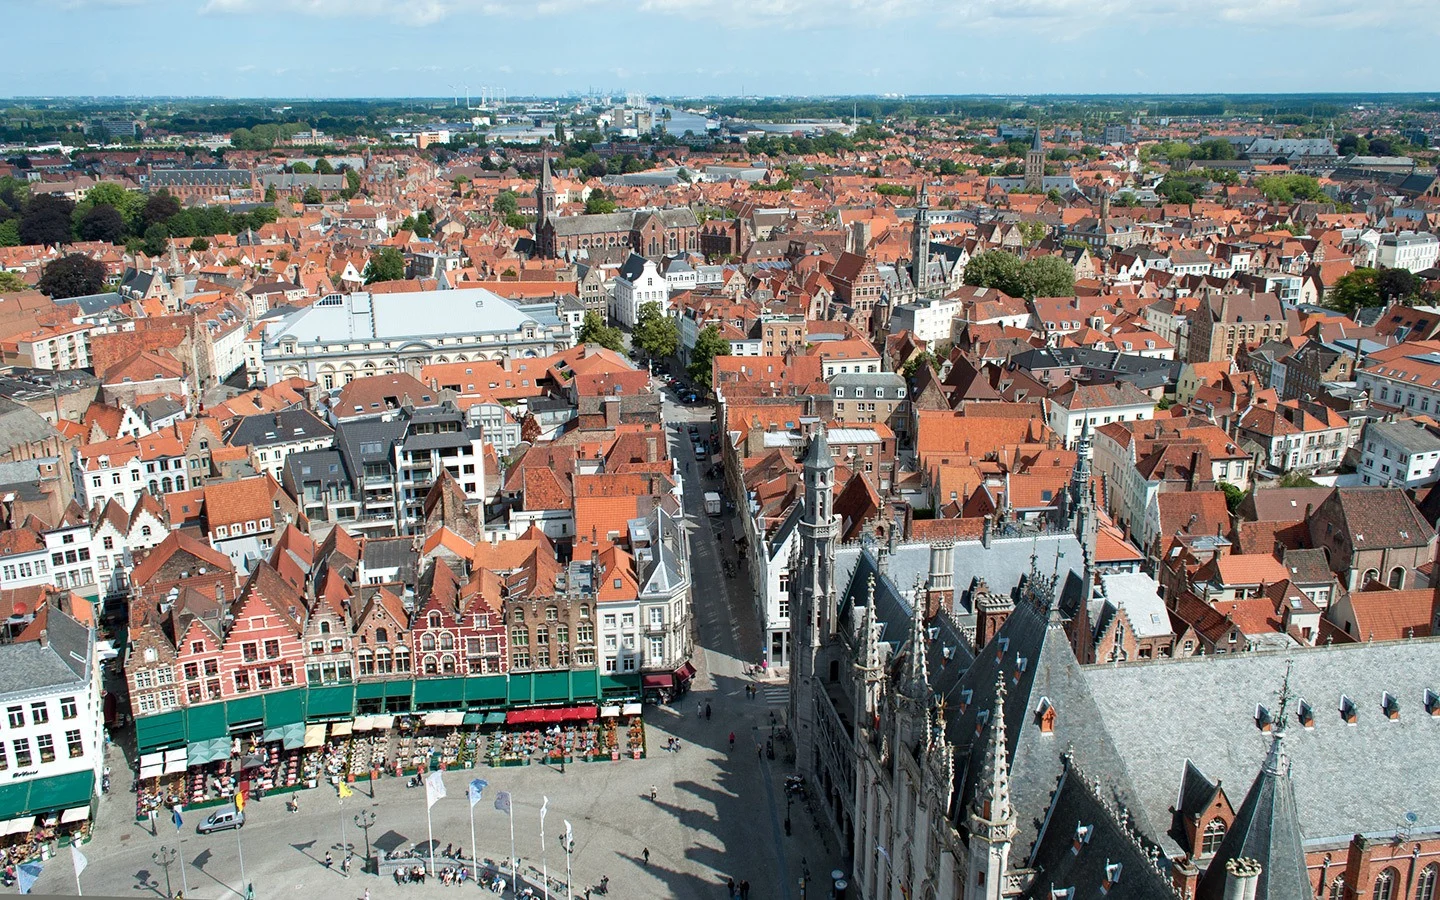 Views over Bruges from the top of the Belfort tower